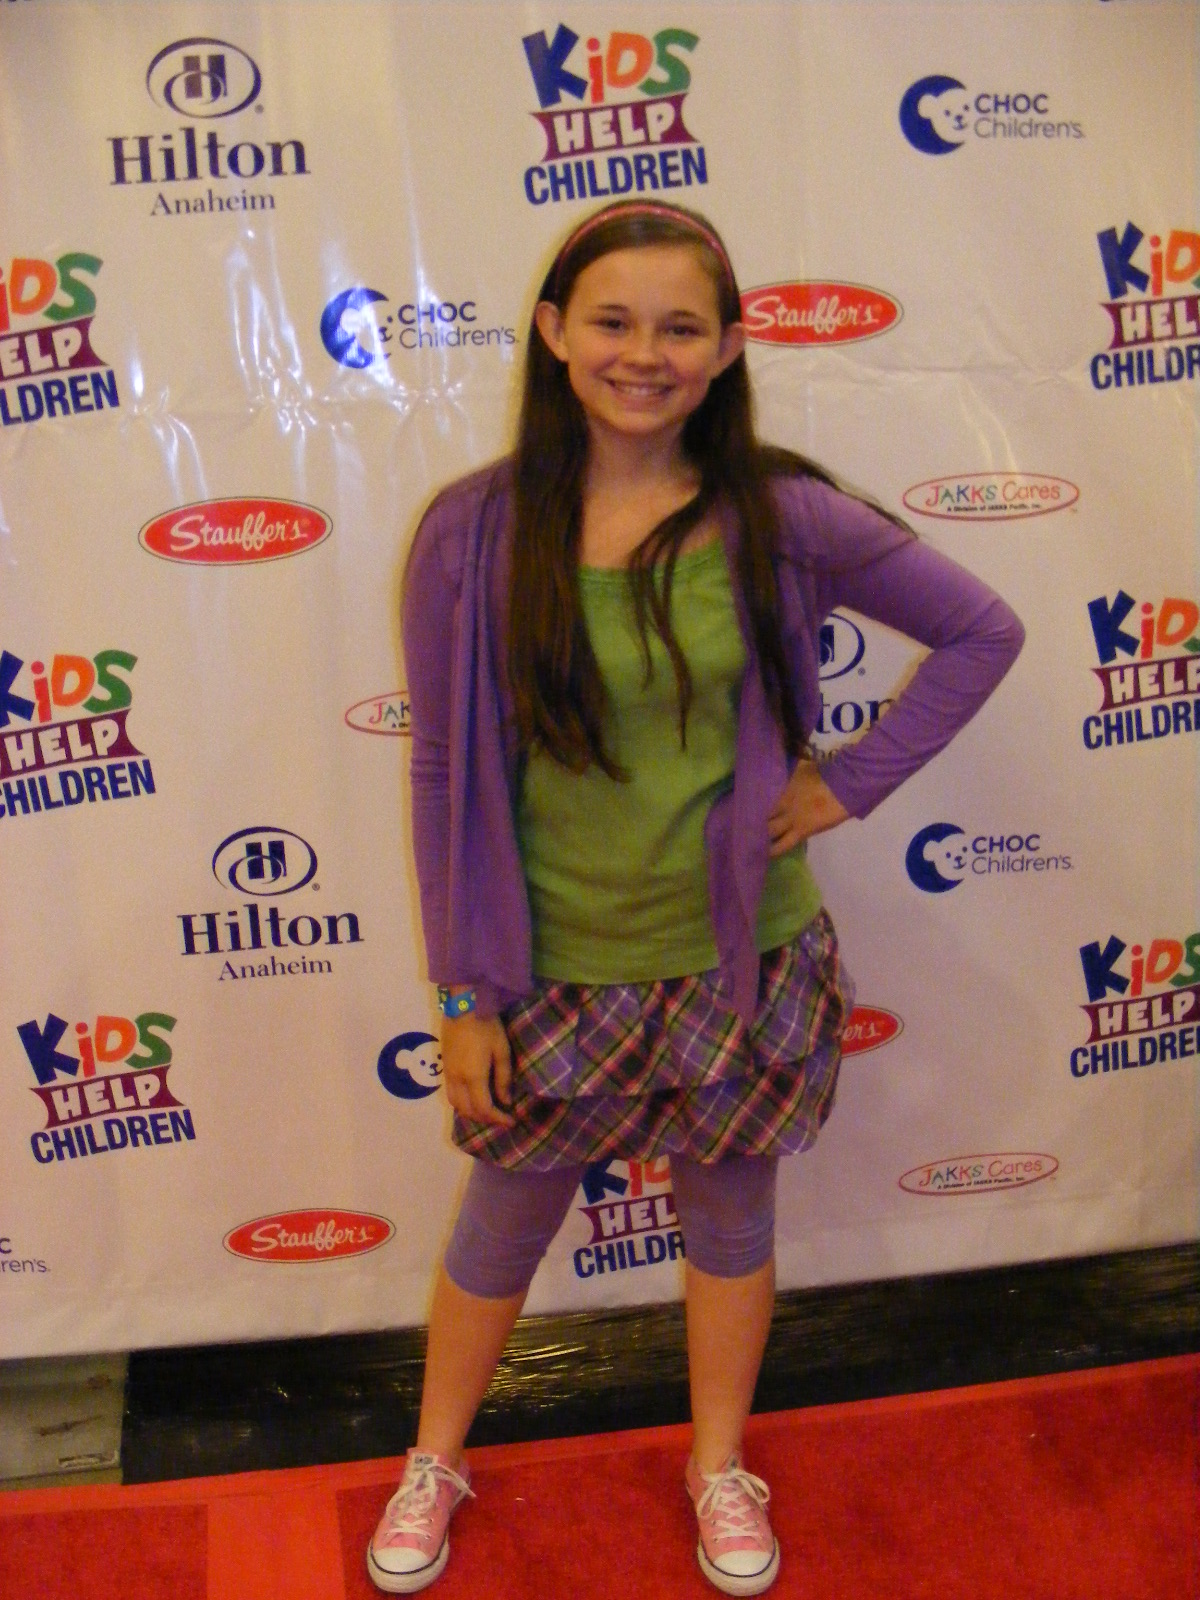 Cassie Earl on the red carpet at the Kids Help Children event in Anaheim, Calfornia